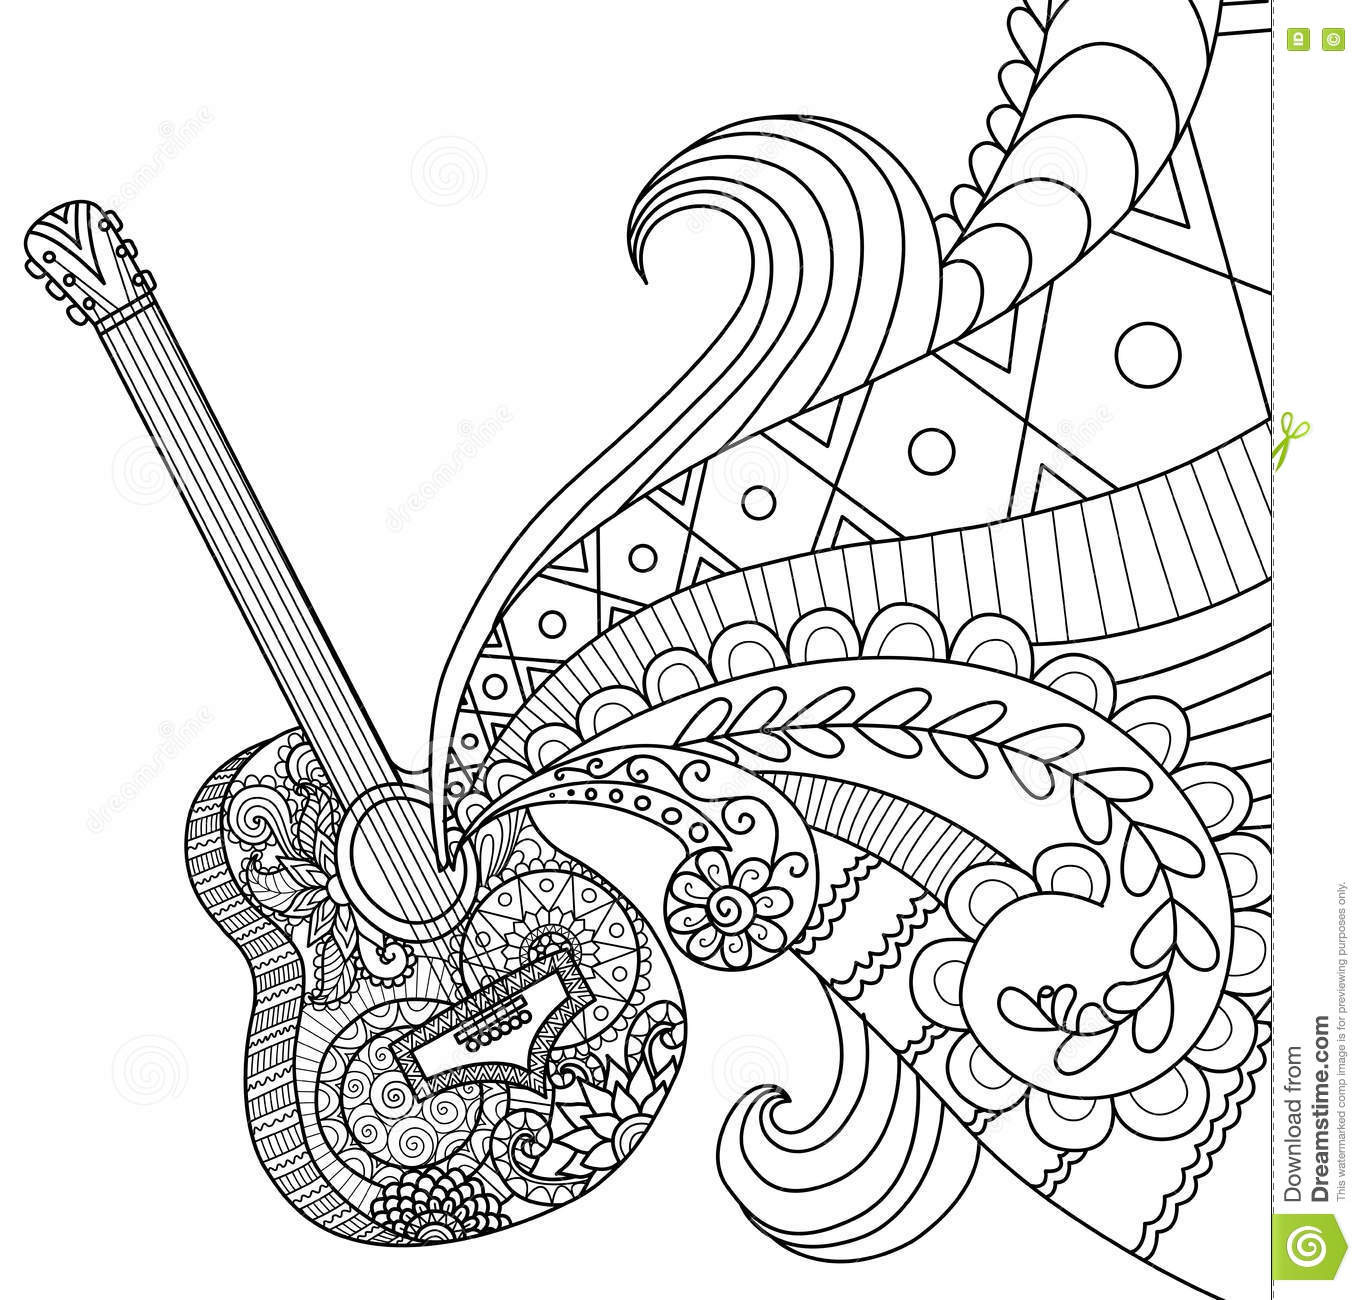 Guitar Coloring Pages For Adults
 Doodles Design Guitar For Coloring Book For Adult Stock